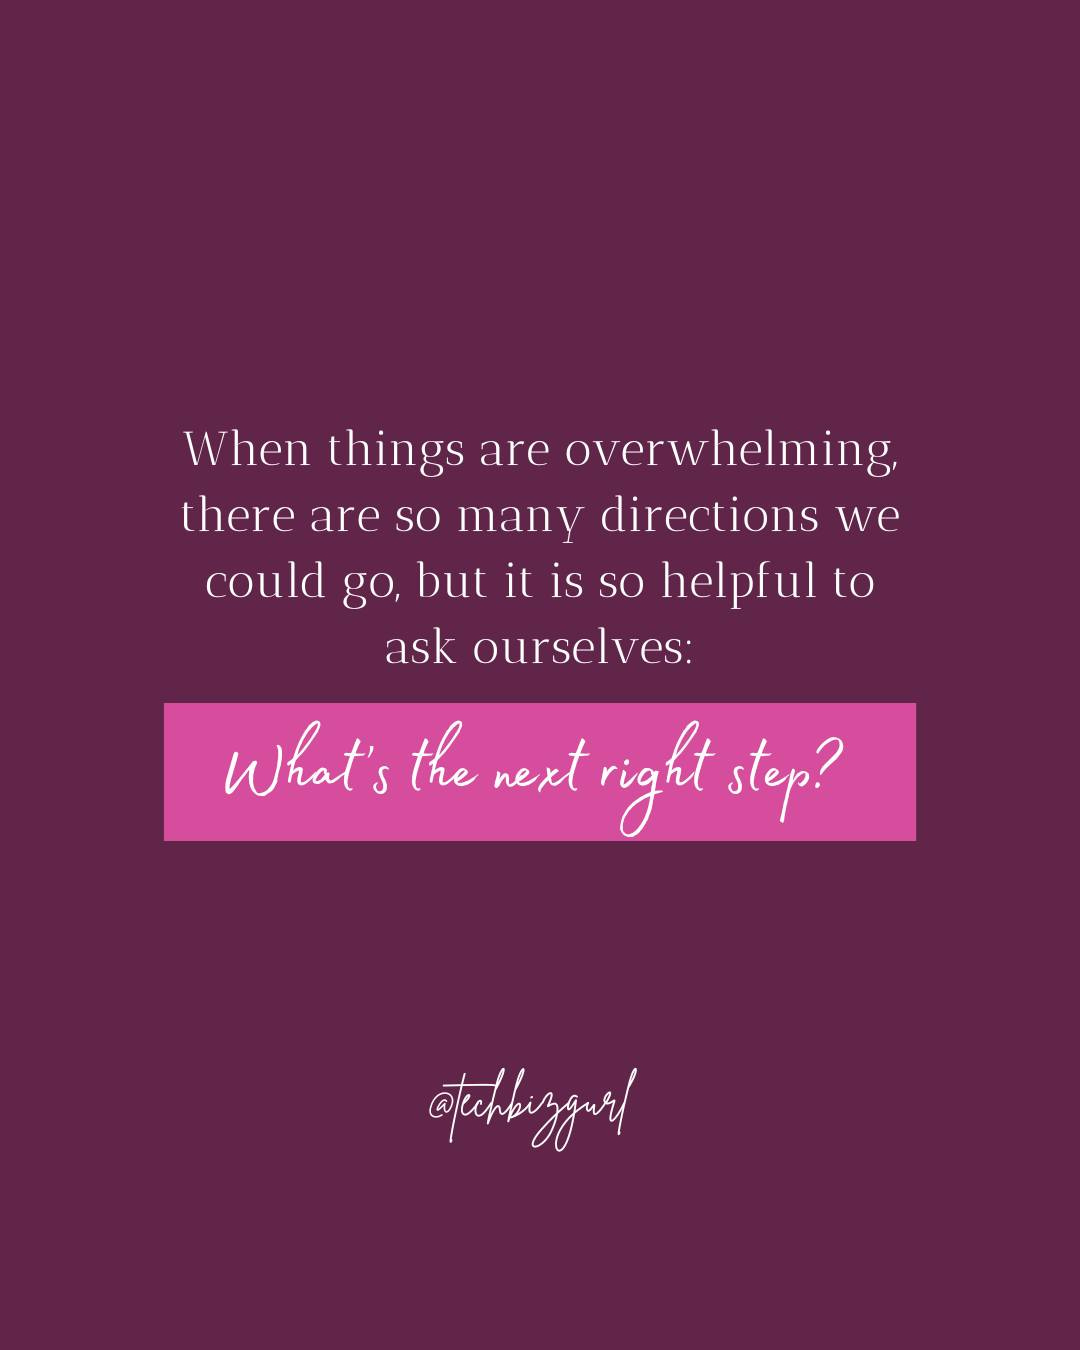 May be a graphic of text that says 'When things are overwhelming, there are so many directions we could go, but it is so helpful to ask ourselves: What's s the next right step? @tuckbegarl'